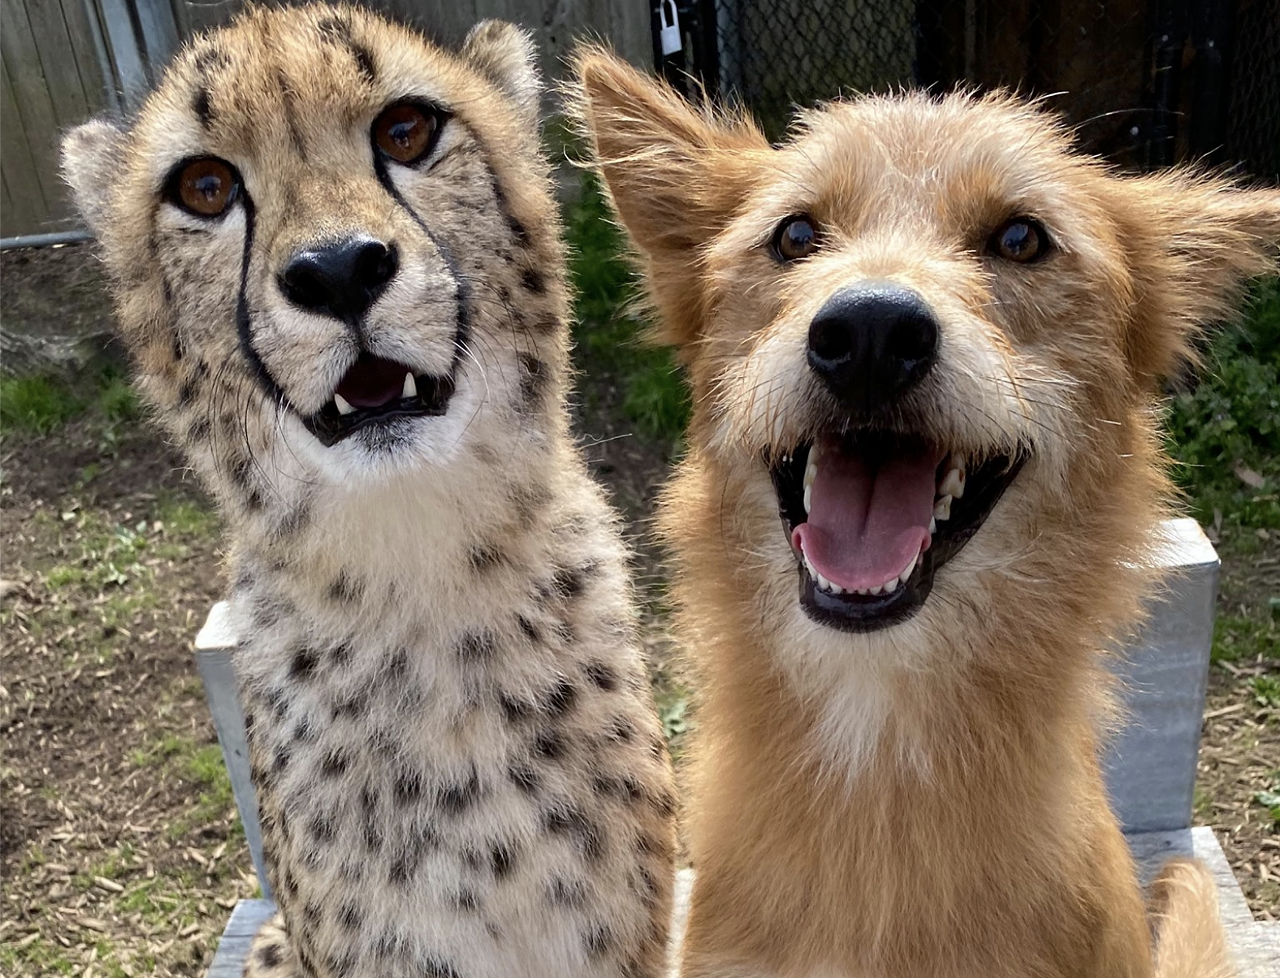 Kris the cheetah and Remus the dog are BFFs.